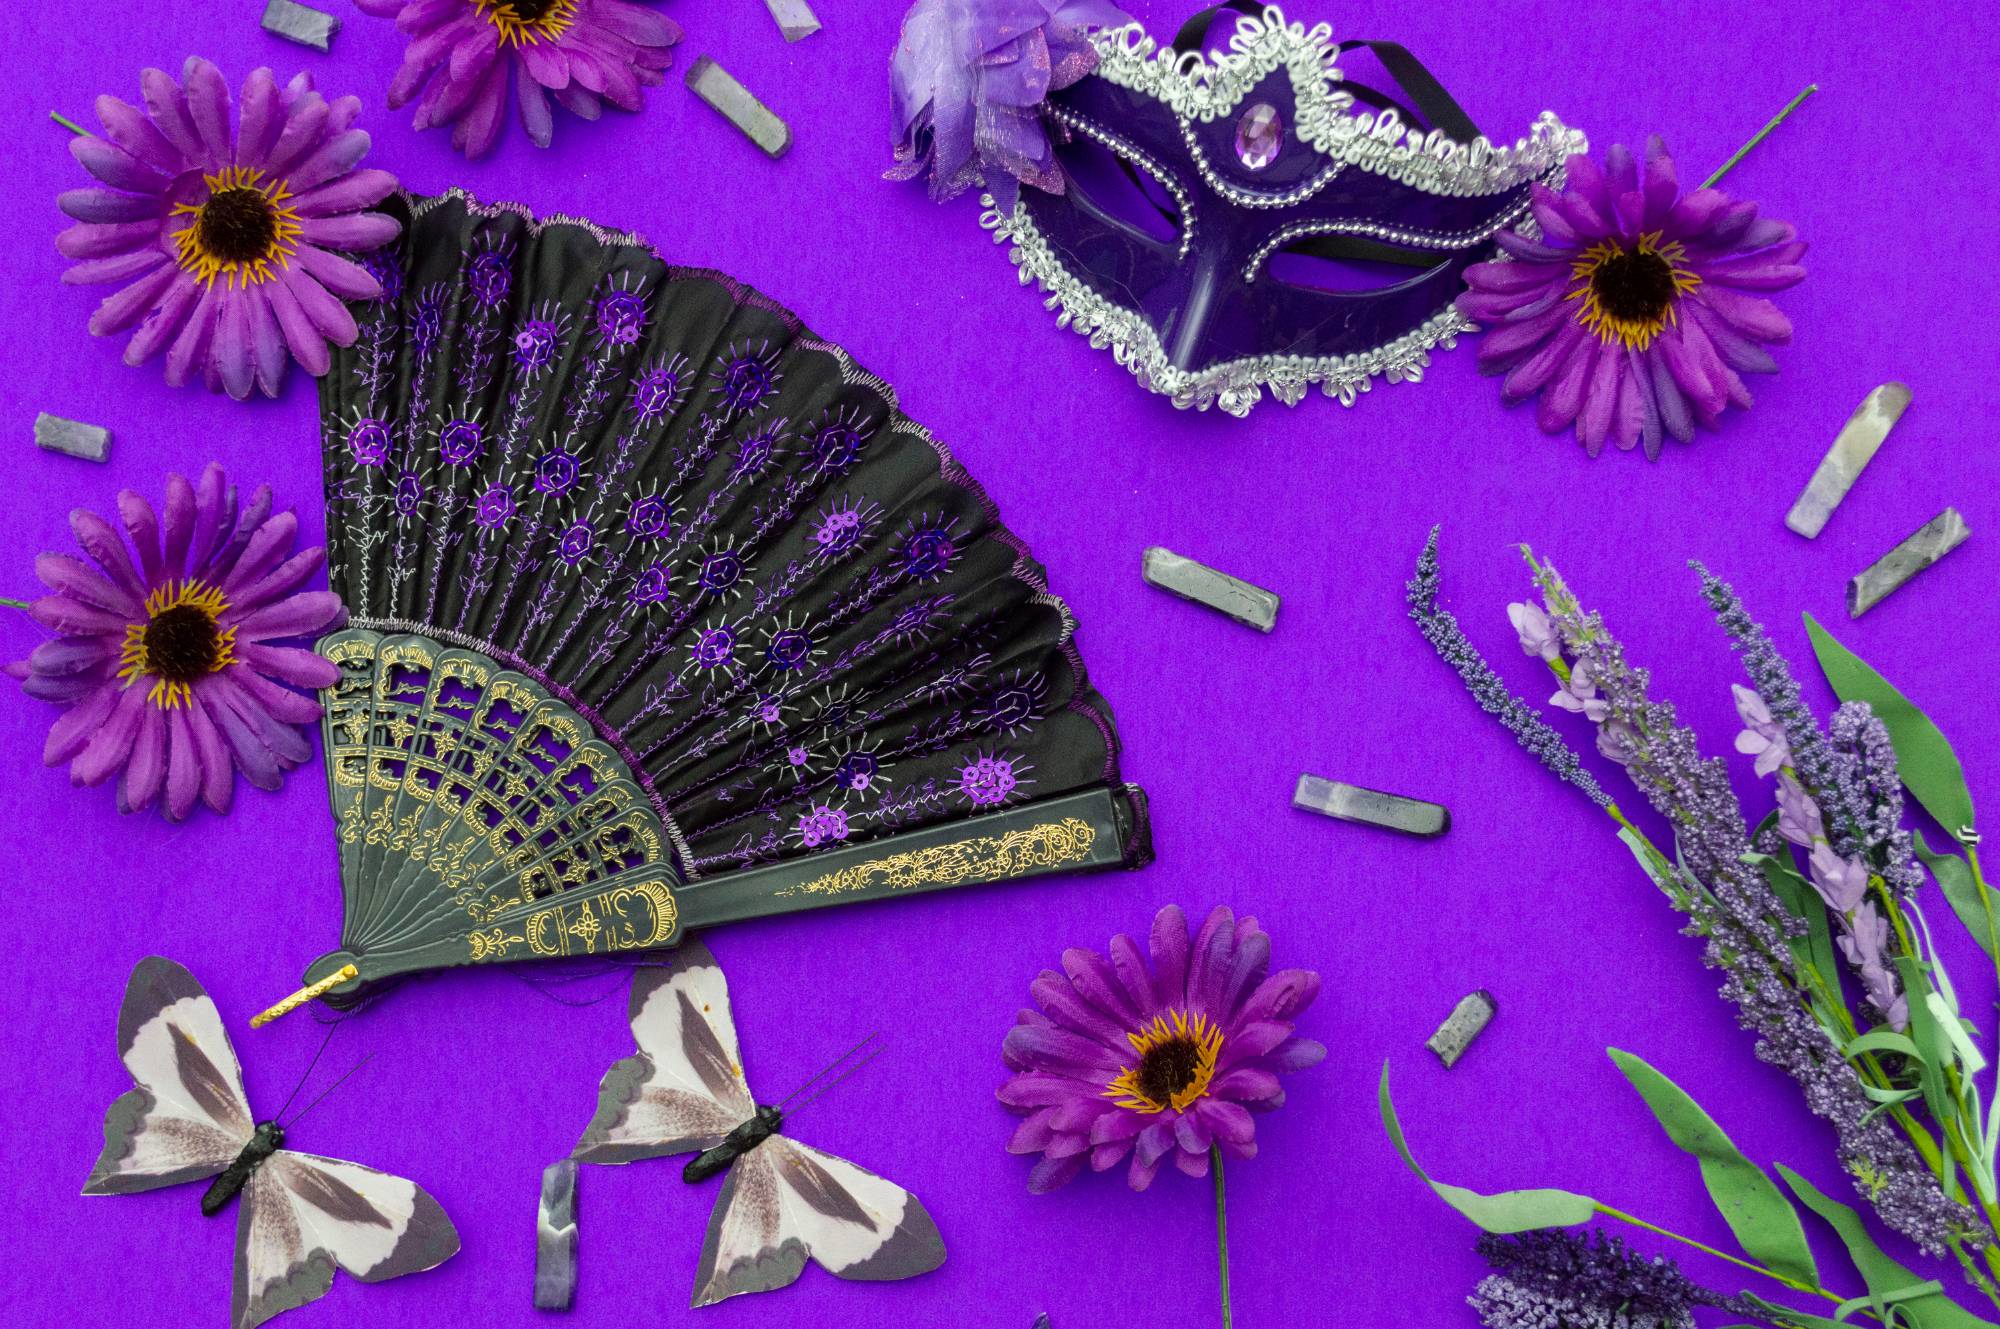 hand fan, mask, and various flora arranged on purple background